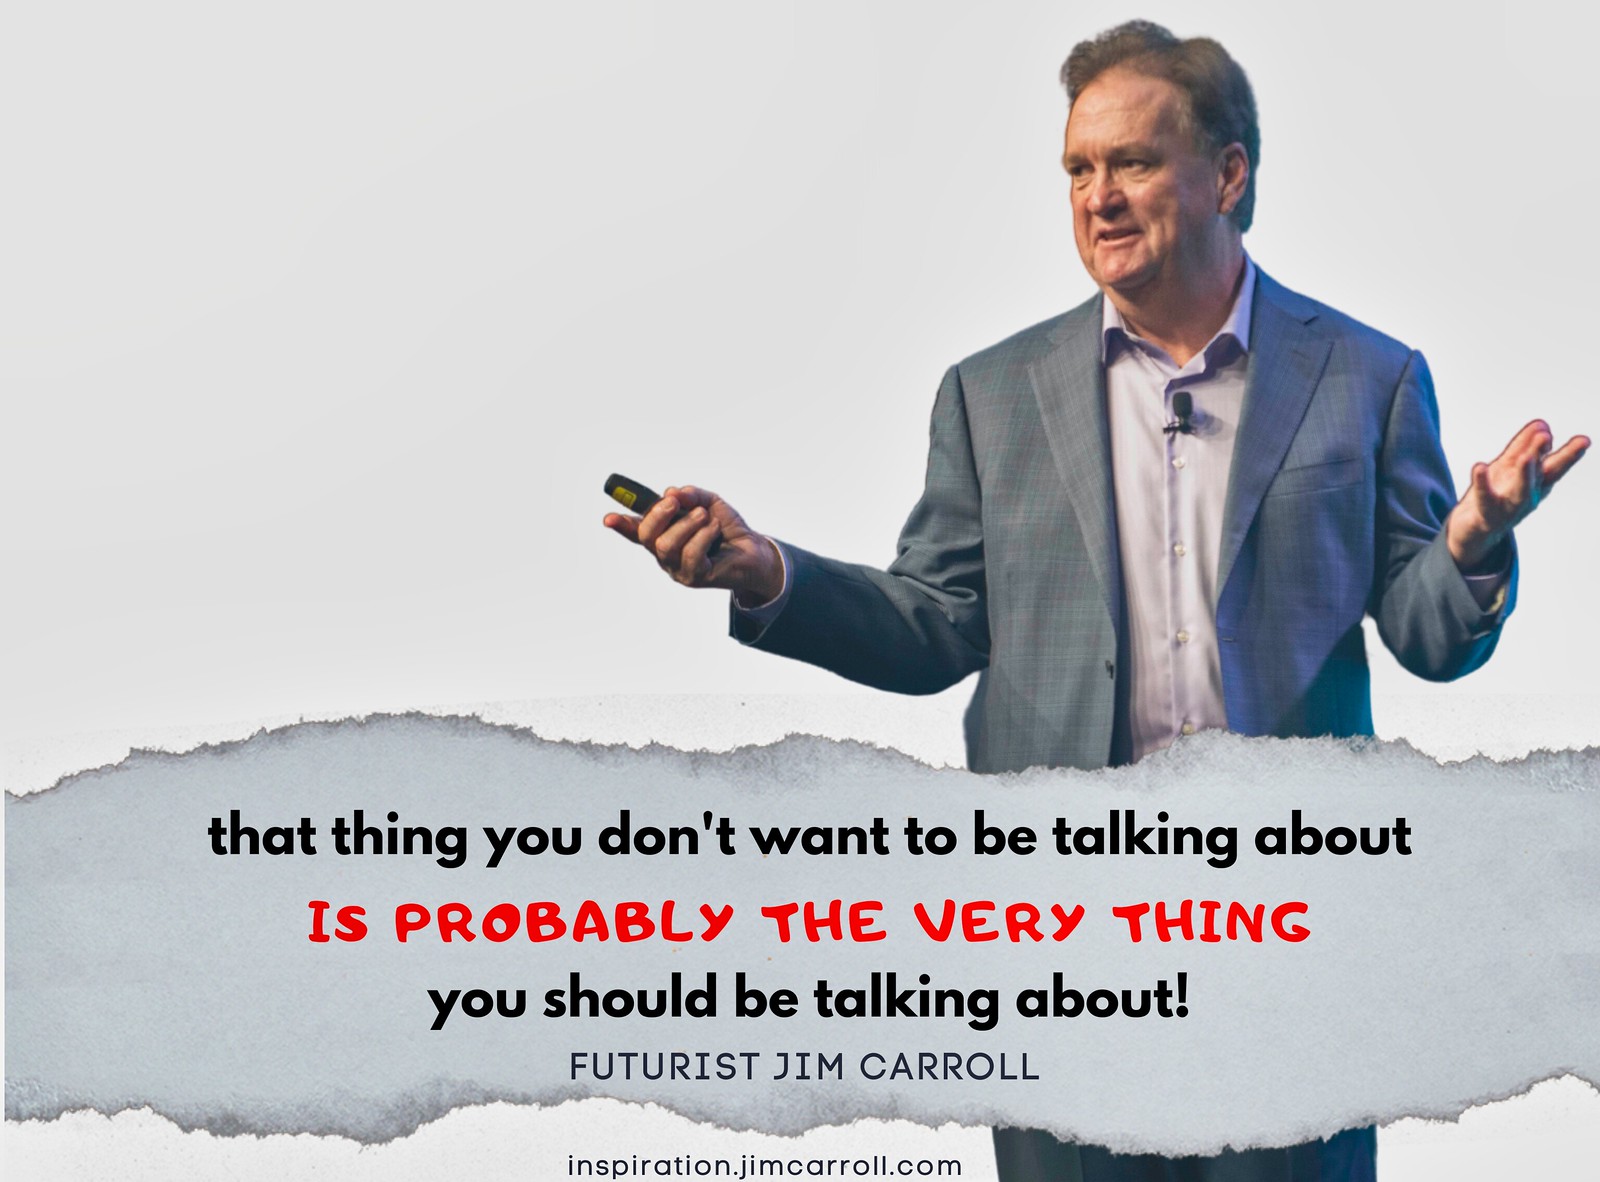 "That thing you don't want to be talking about is probably the very thing you should be talking about!" - Futurist Jim Carroll